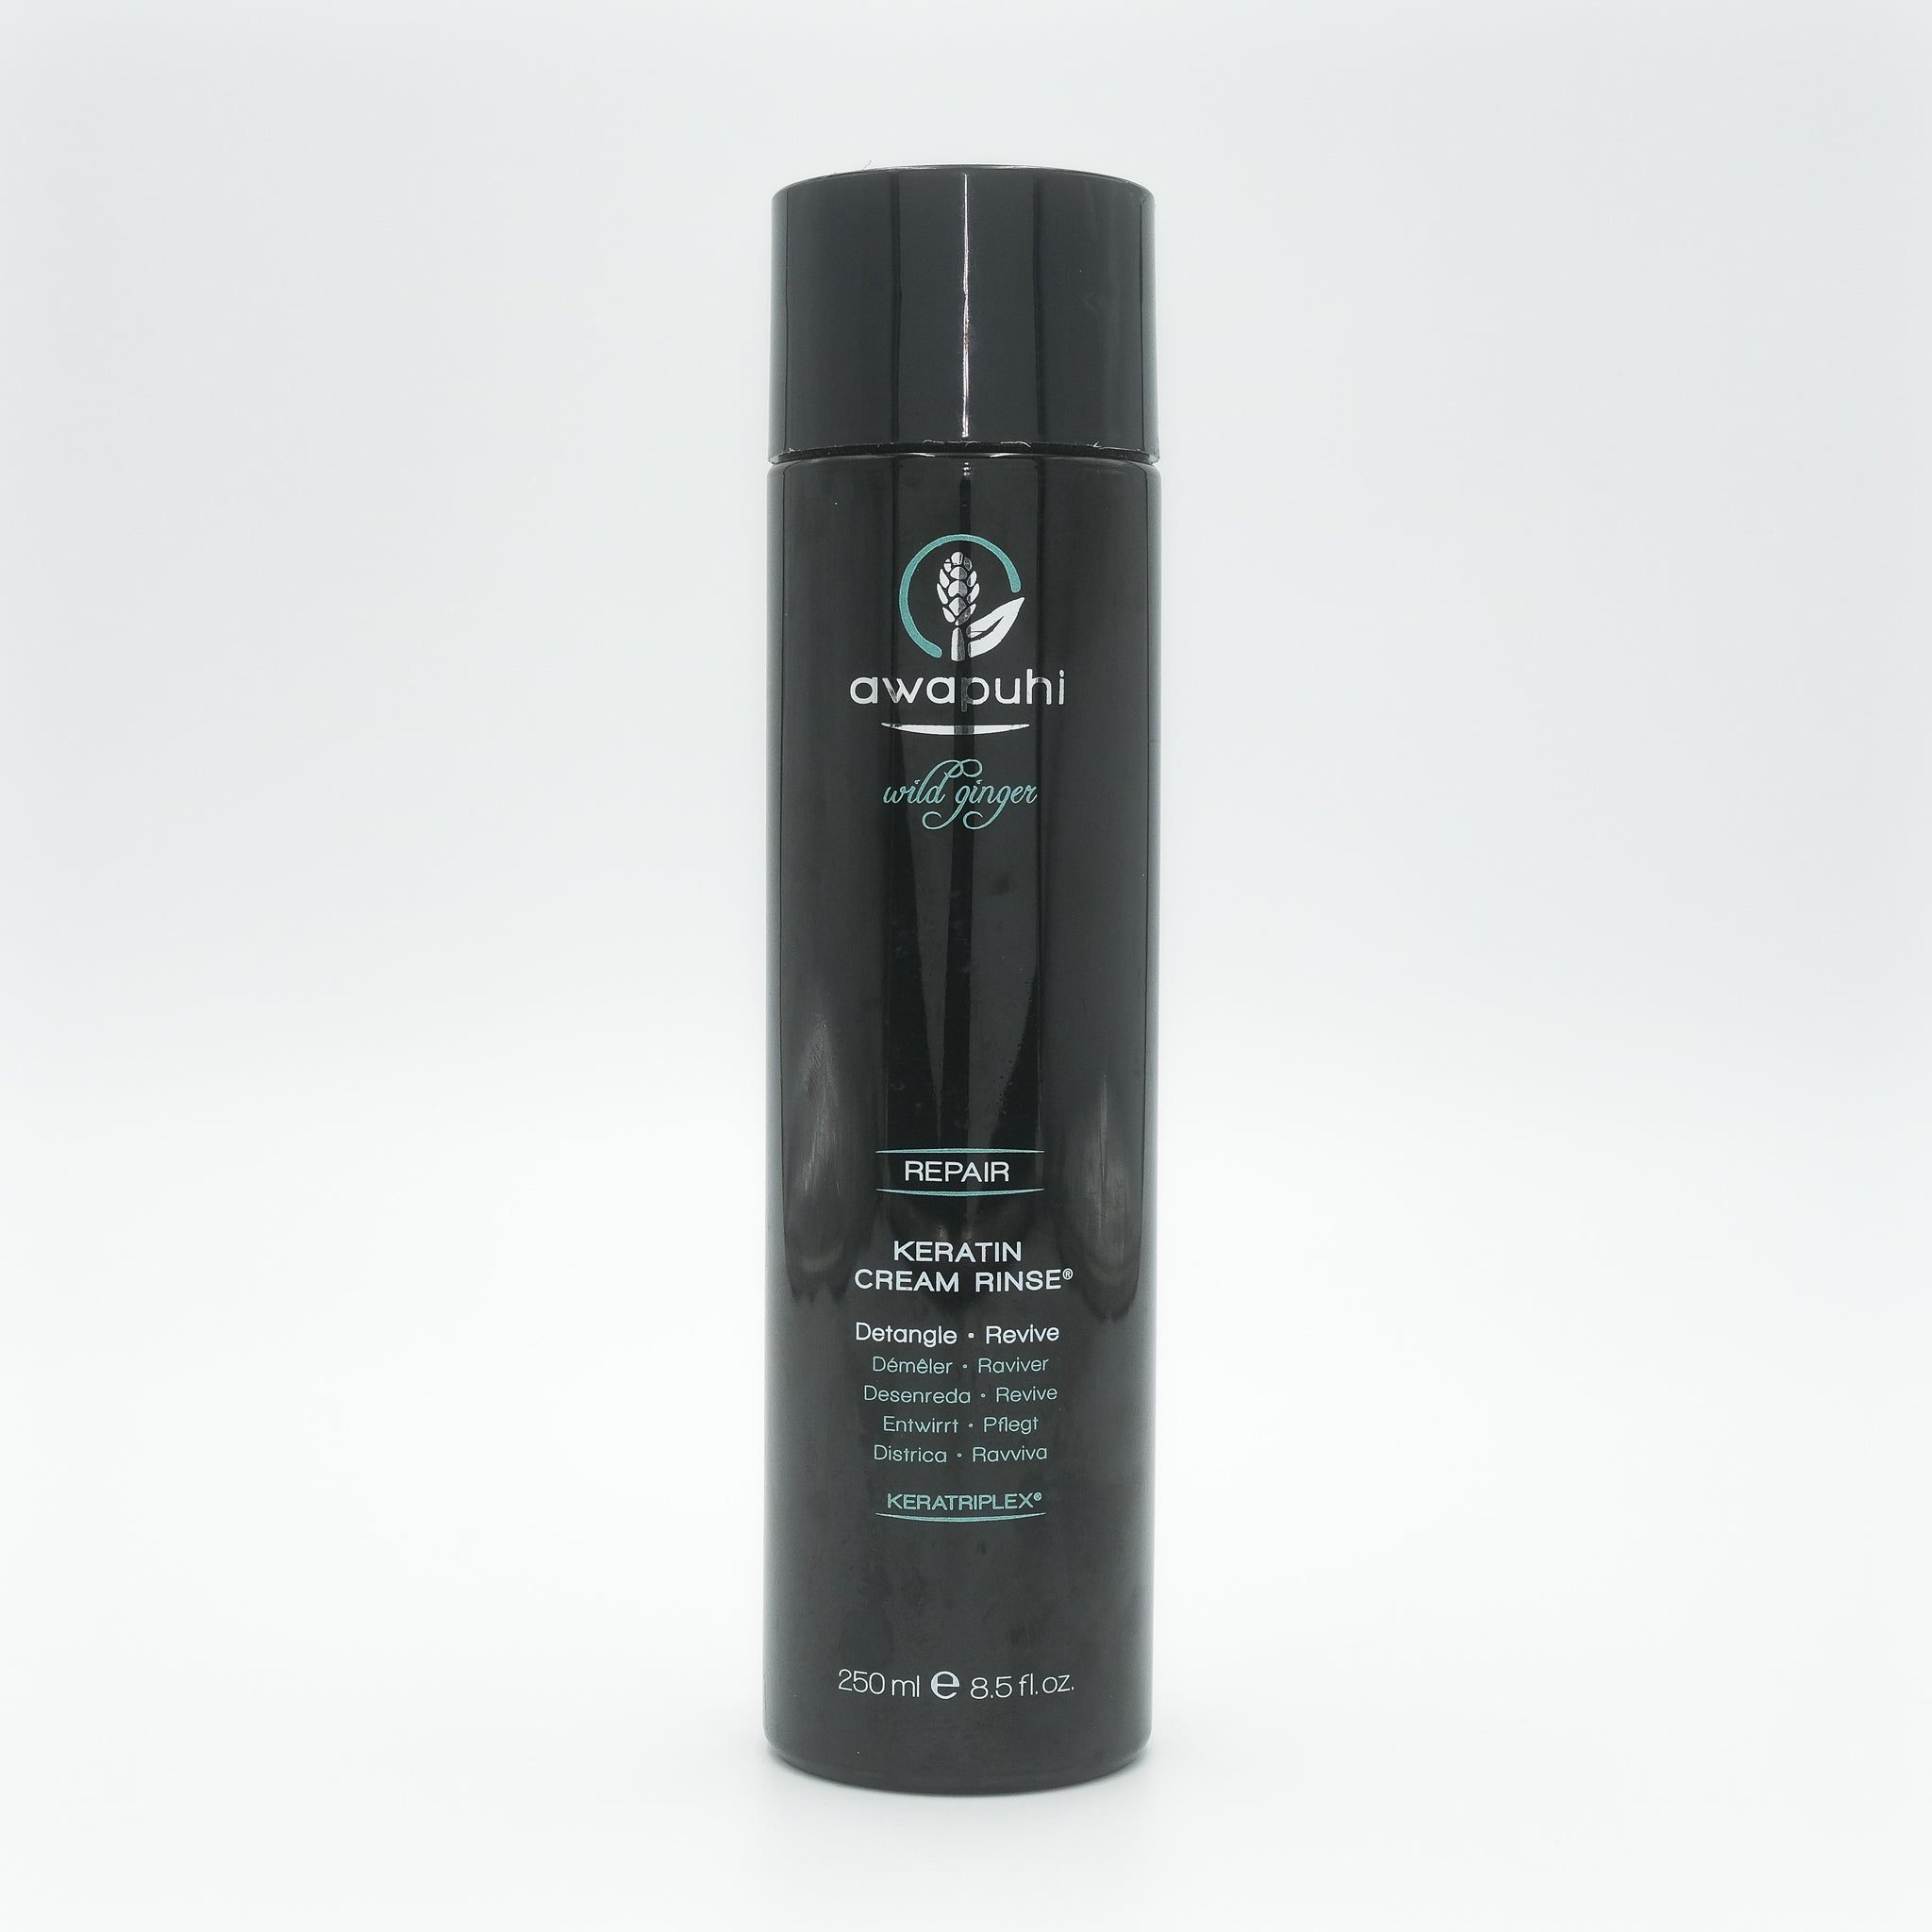 PRETTY IN A MINUTE Smoothing Collection Smoothing Keratin Shampoo 12 oz